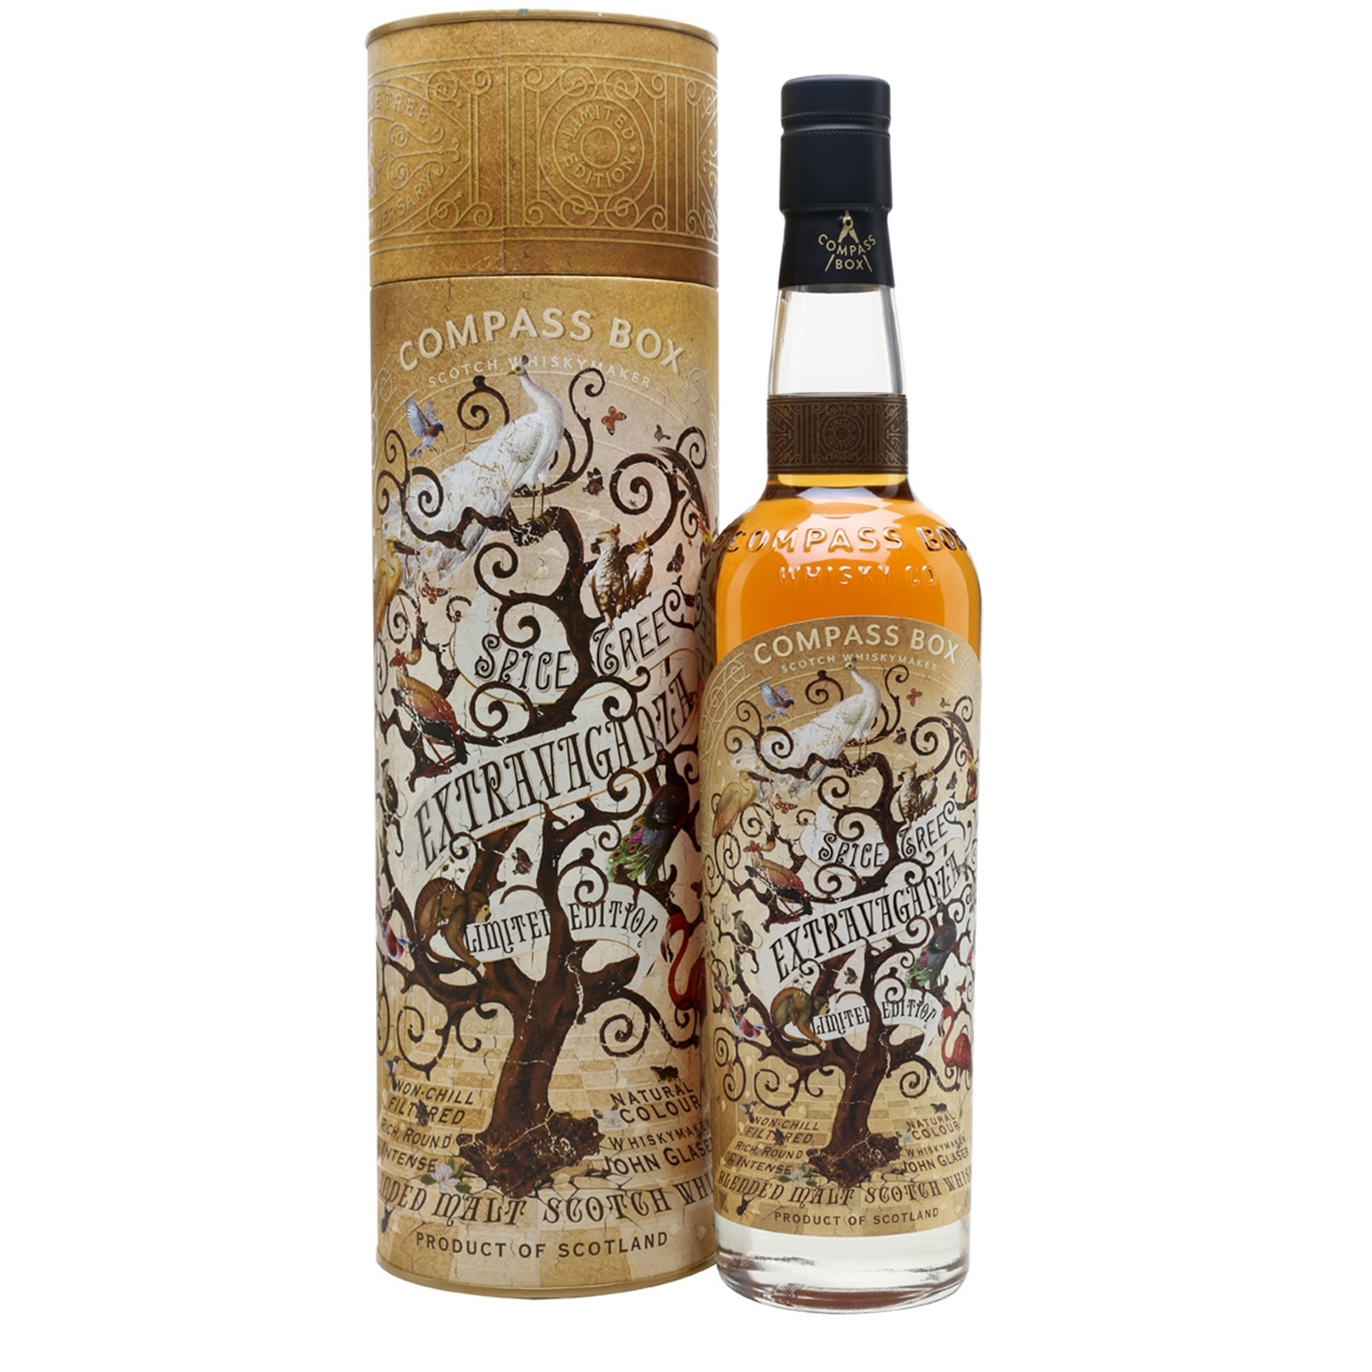 Compass Box Spice Tree Extravaganza Limited Edition Blended Malt Scotch Whisky